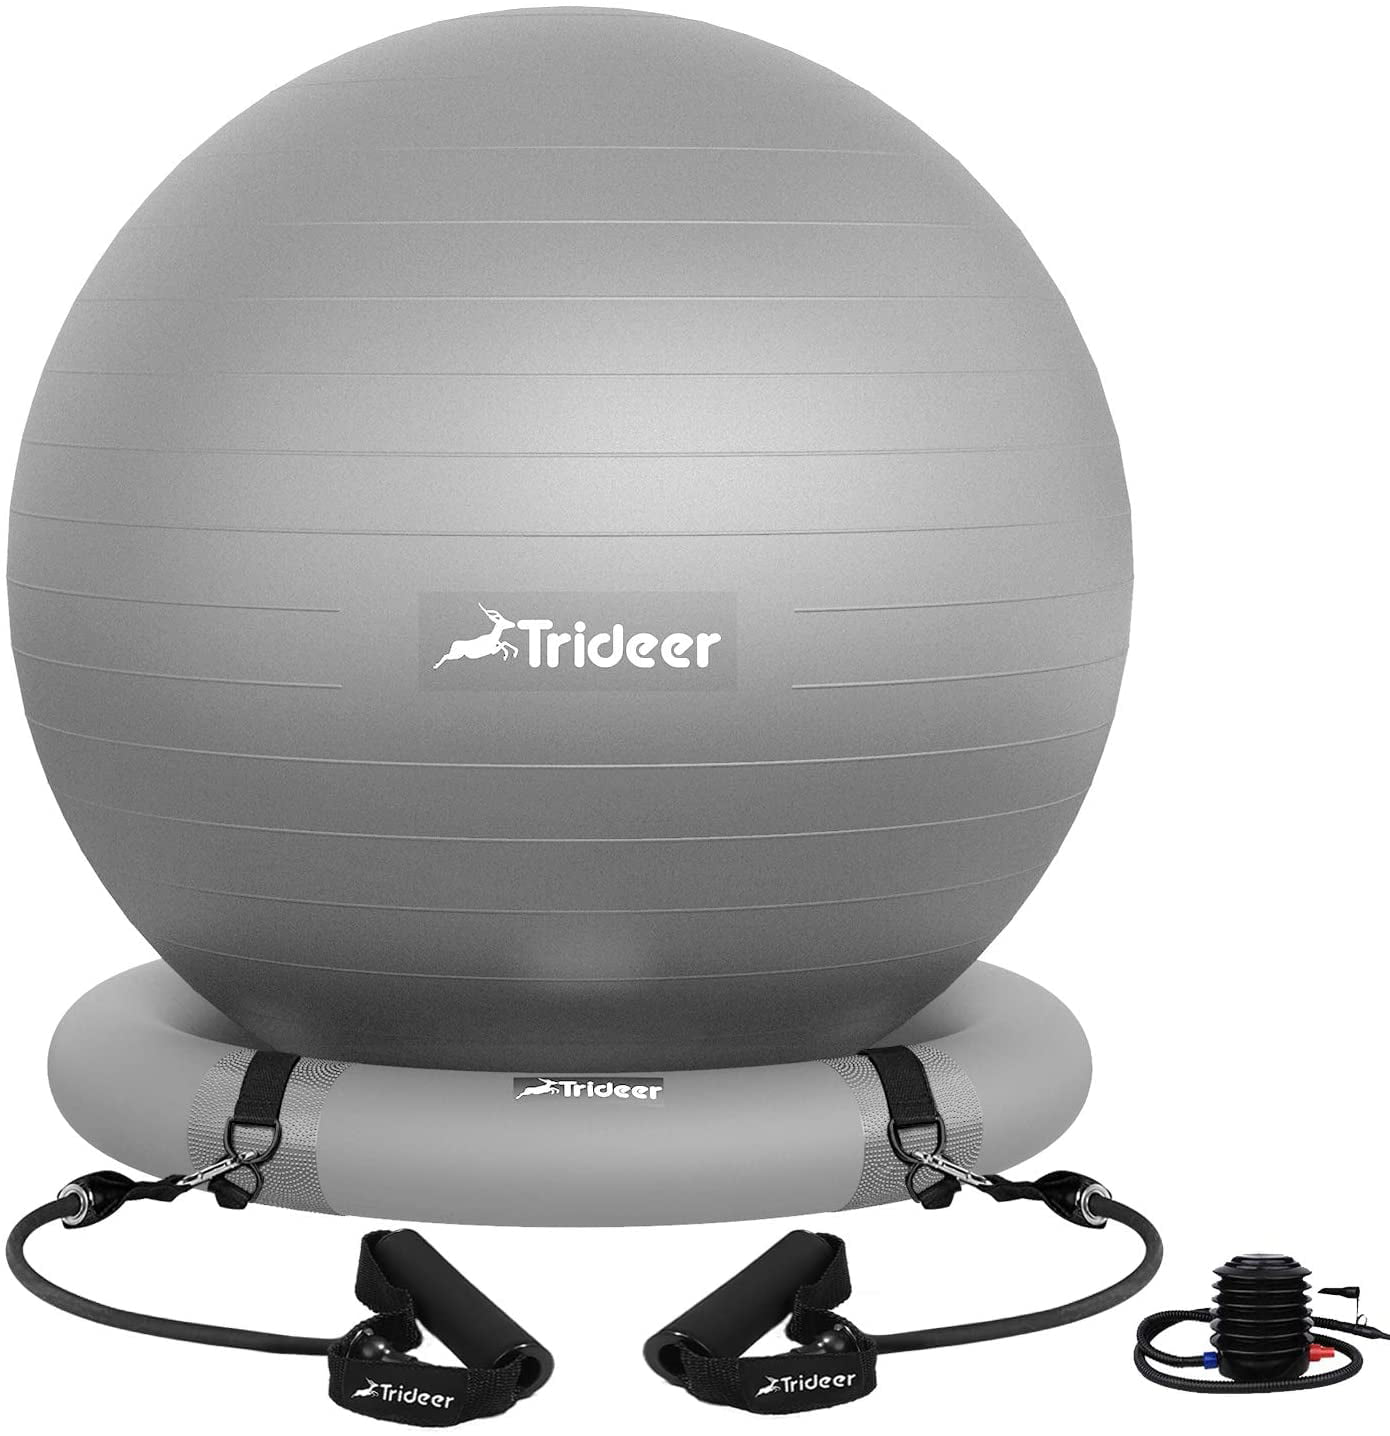 Trideer Ball Chair Exercise Stability Yoga Ball With Base For Home And Office Desk Ball Seat Flexible Seating With Ring Pump Improves Balance Back Pain Core Strength Posture